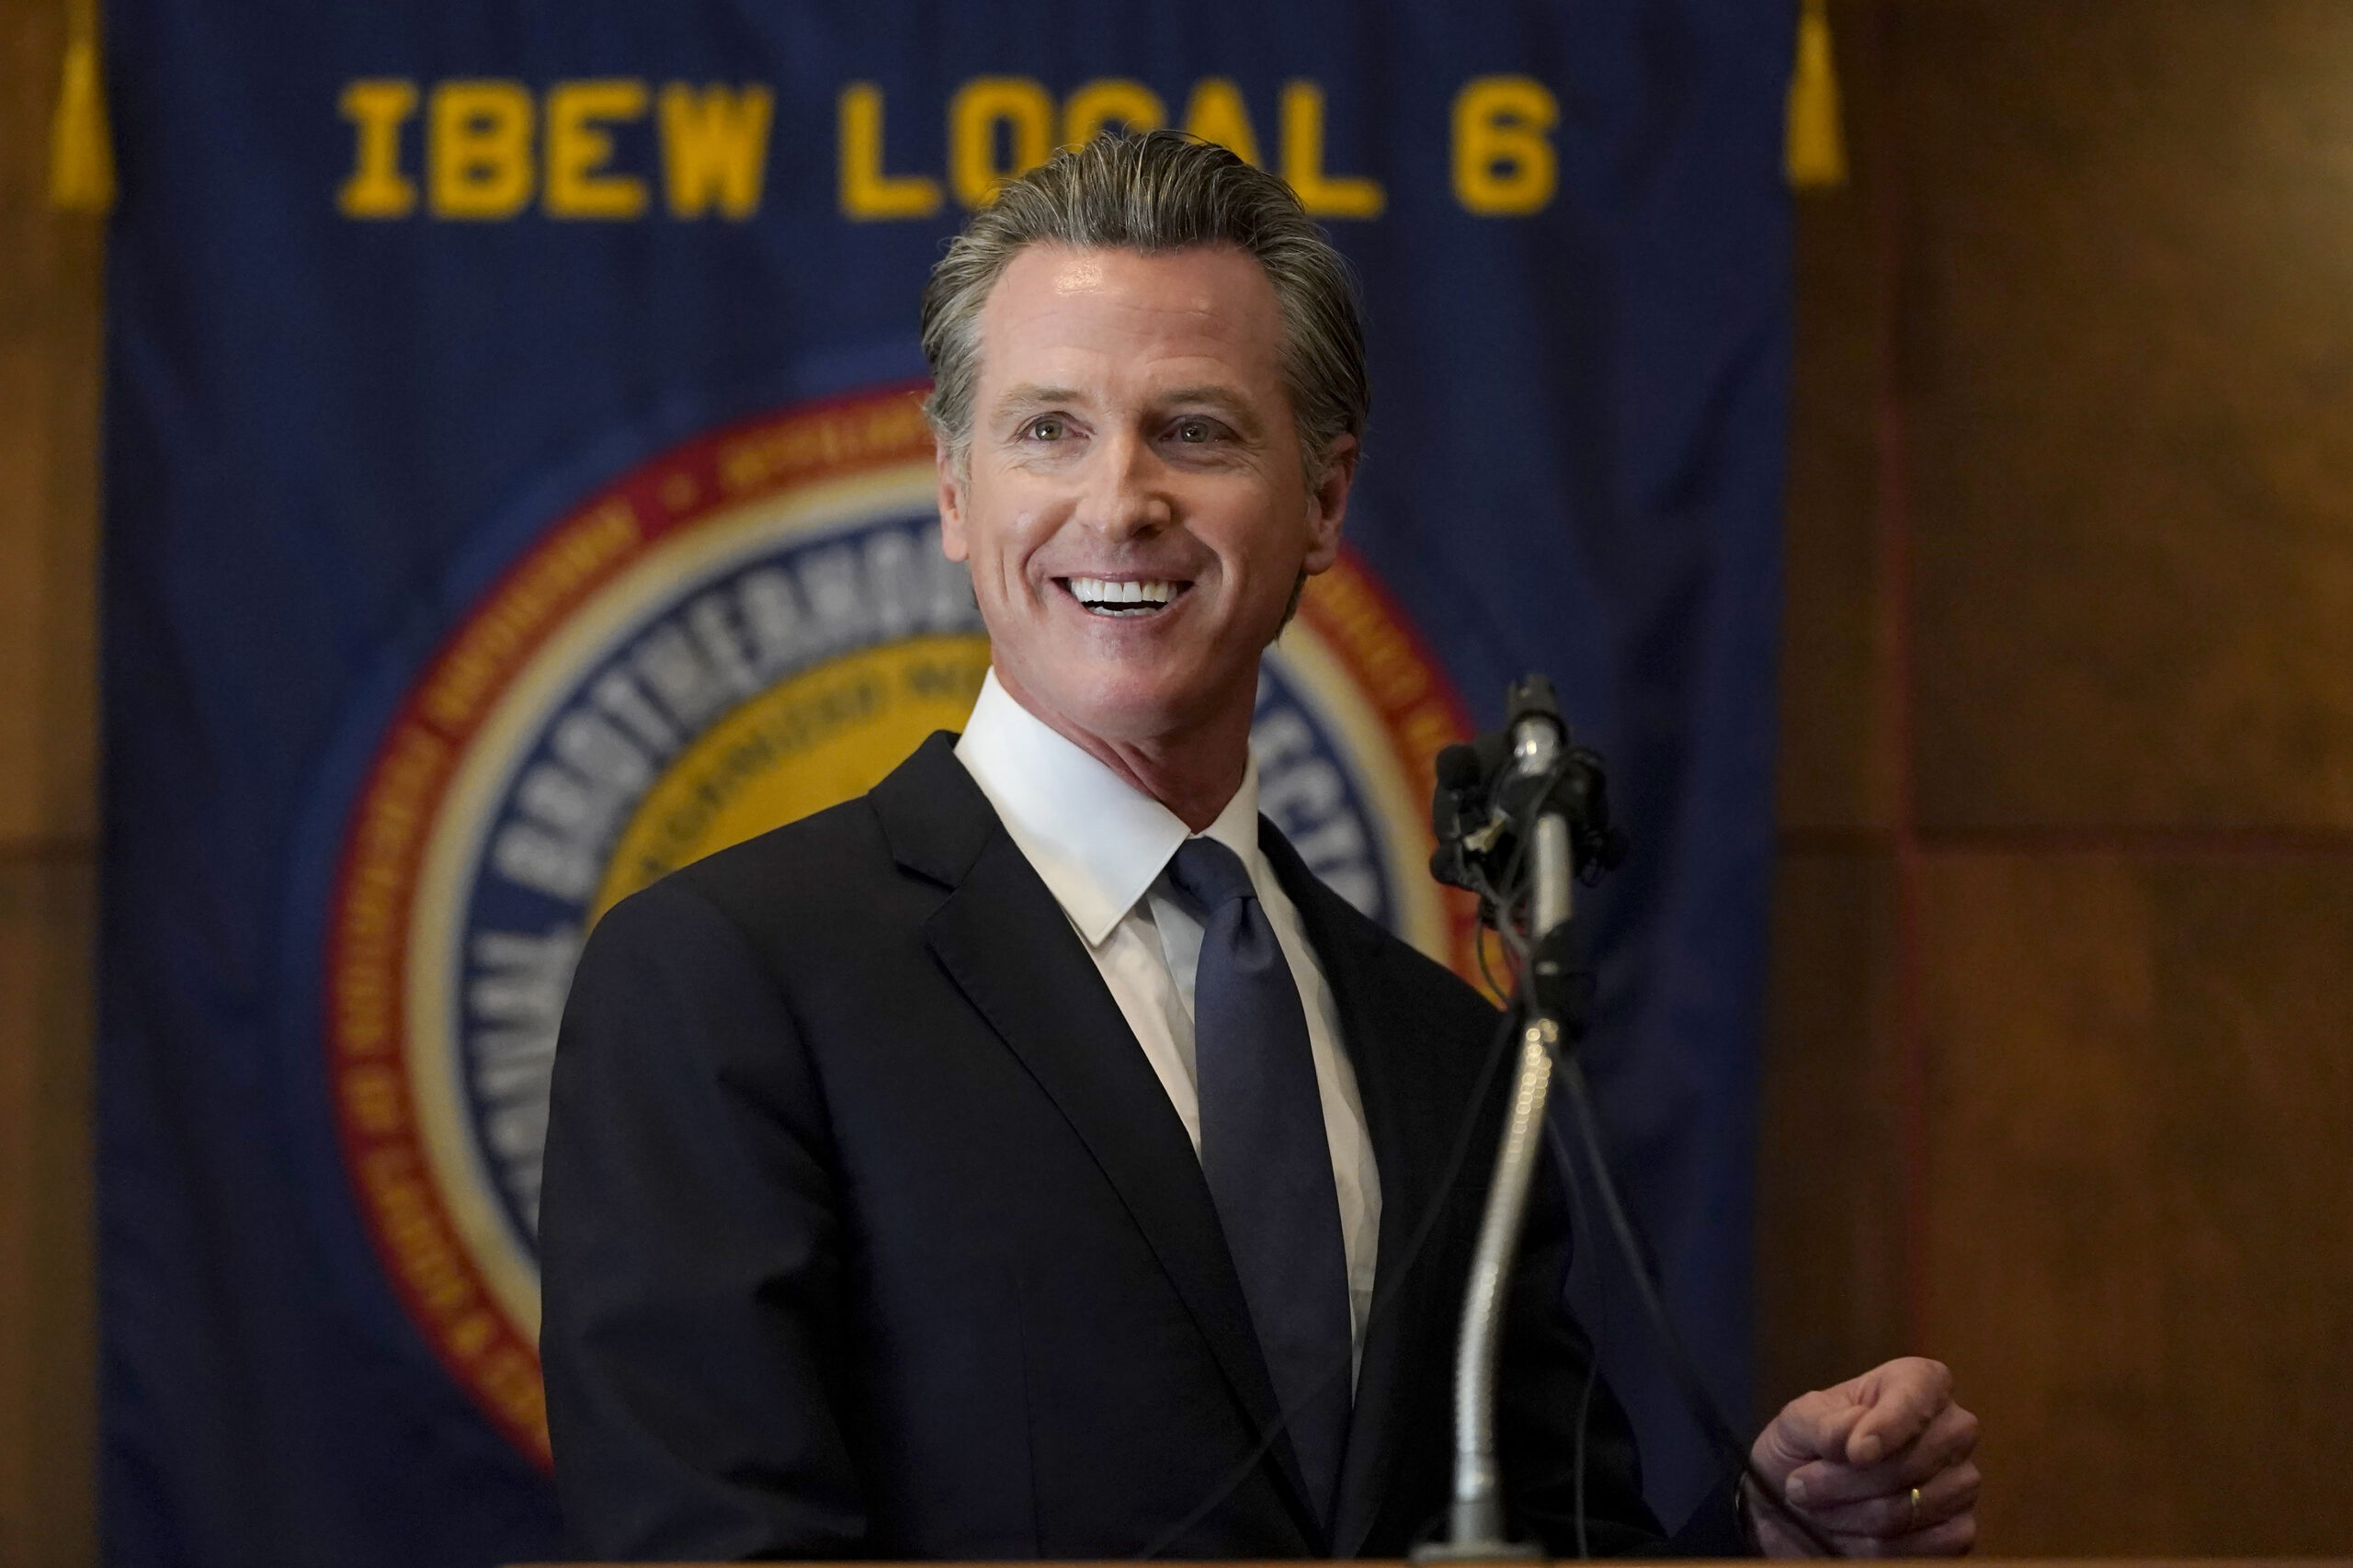 Gov. Gavin Newsom speaks to volunteers in San Francisco, Tuesday, Sept. 14, 2021. The recall election that could remove California Democratic Gov. Newsom is coming to an end. Voting concludes Tuesday in the rare, late-summer election that has emerged as a national battlefront on issues from COVID-19 restrictions to climate change. (AP Photo/Jeff Chiu)